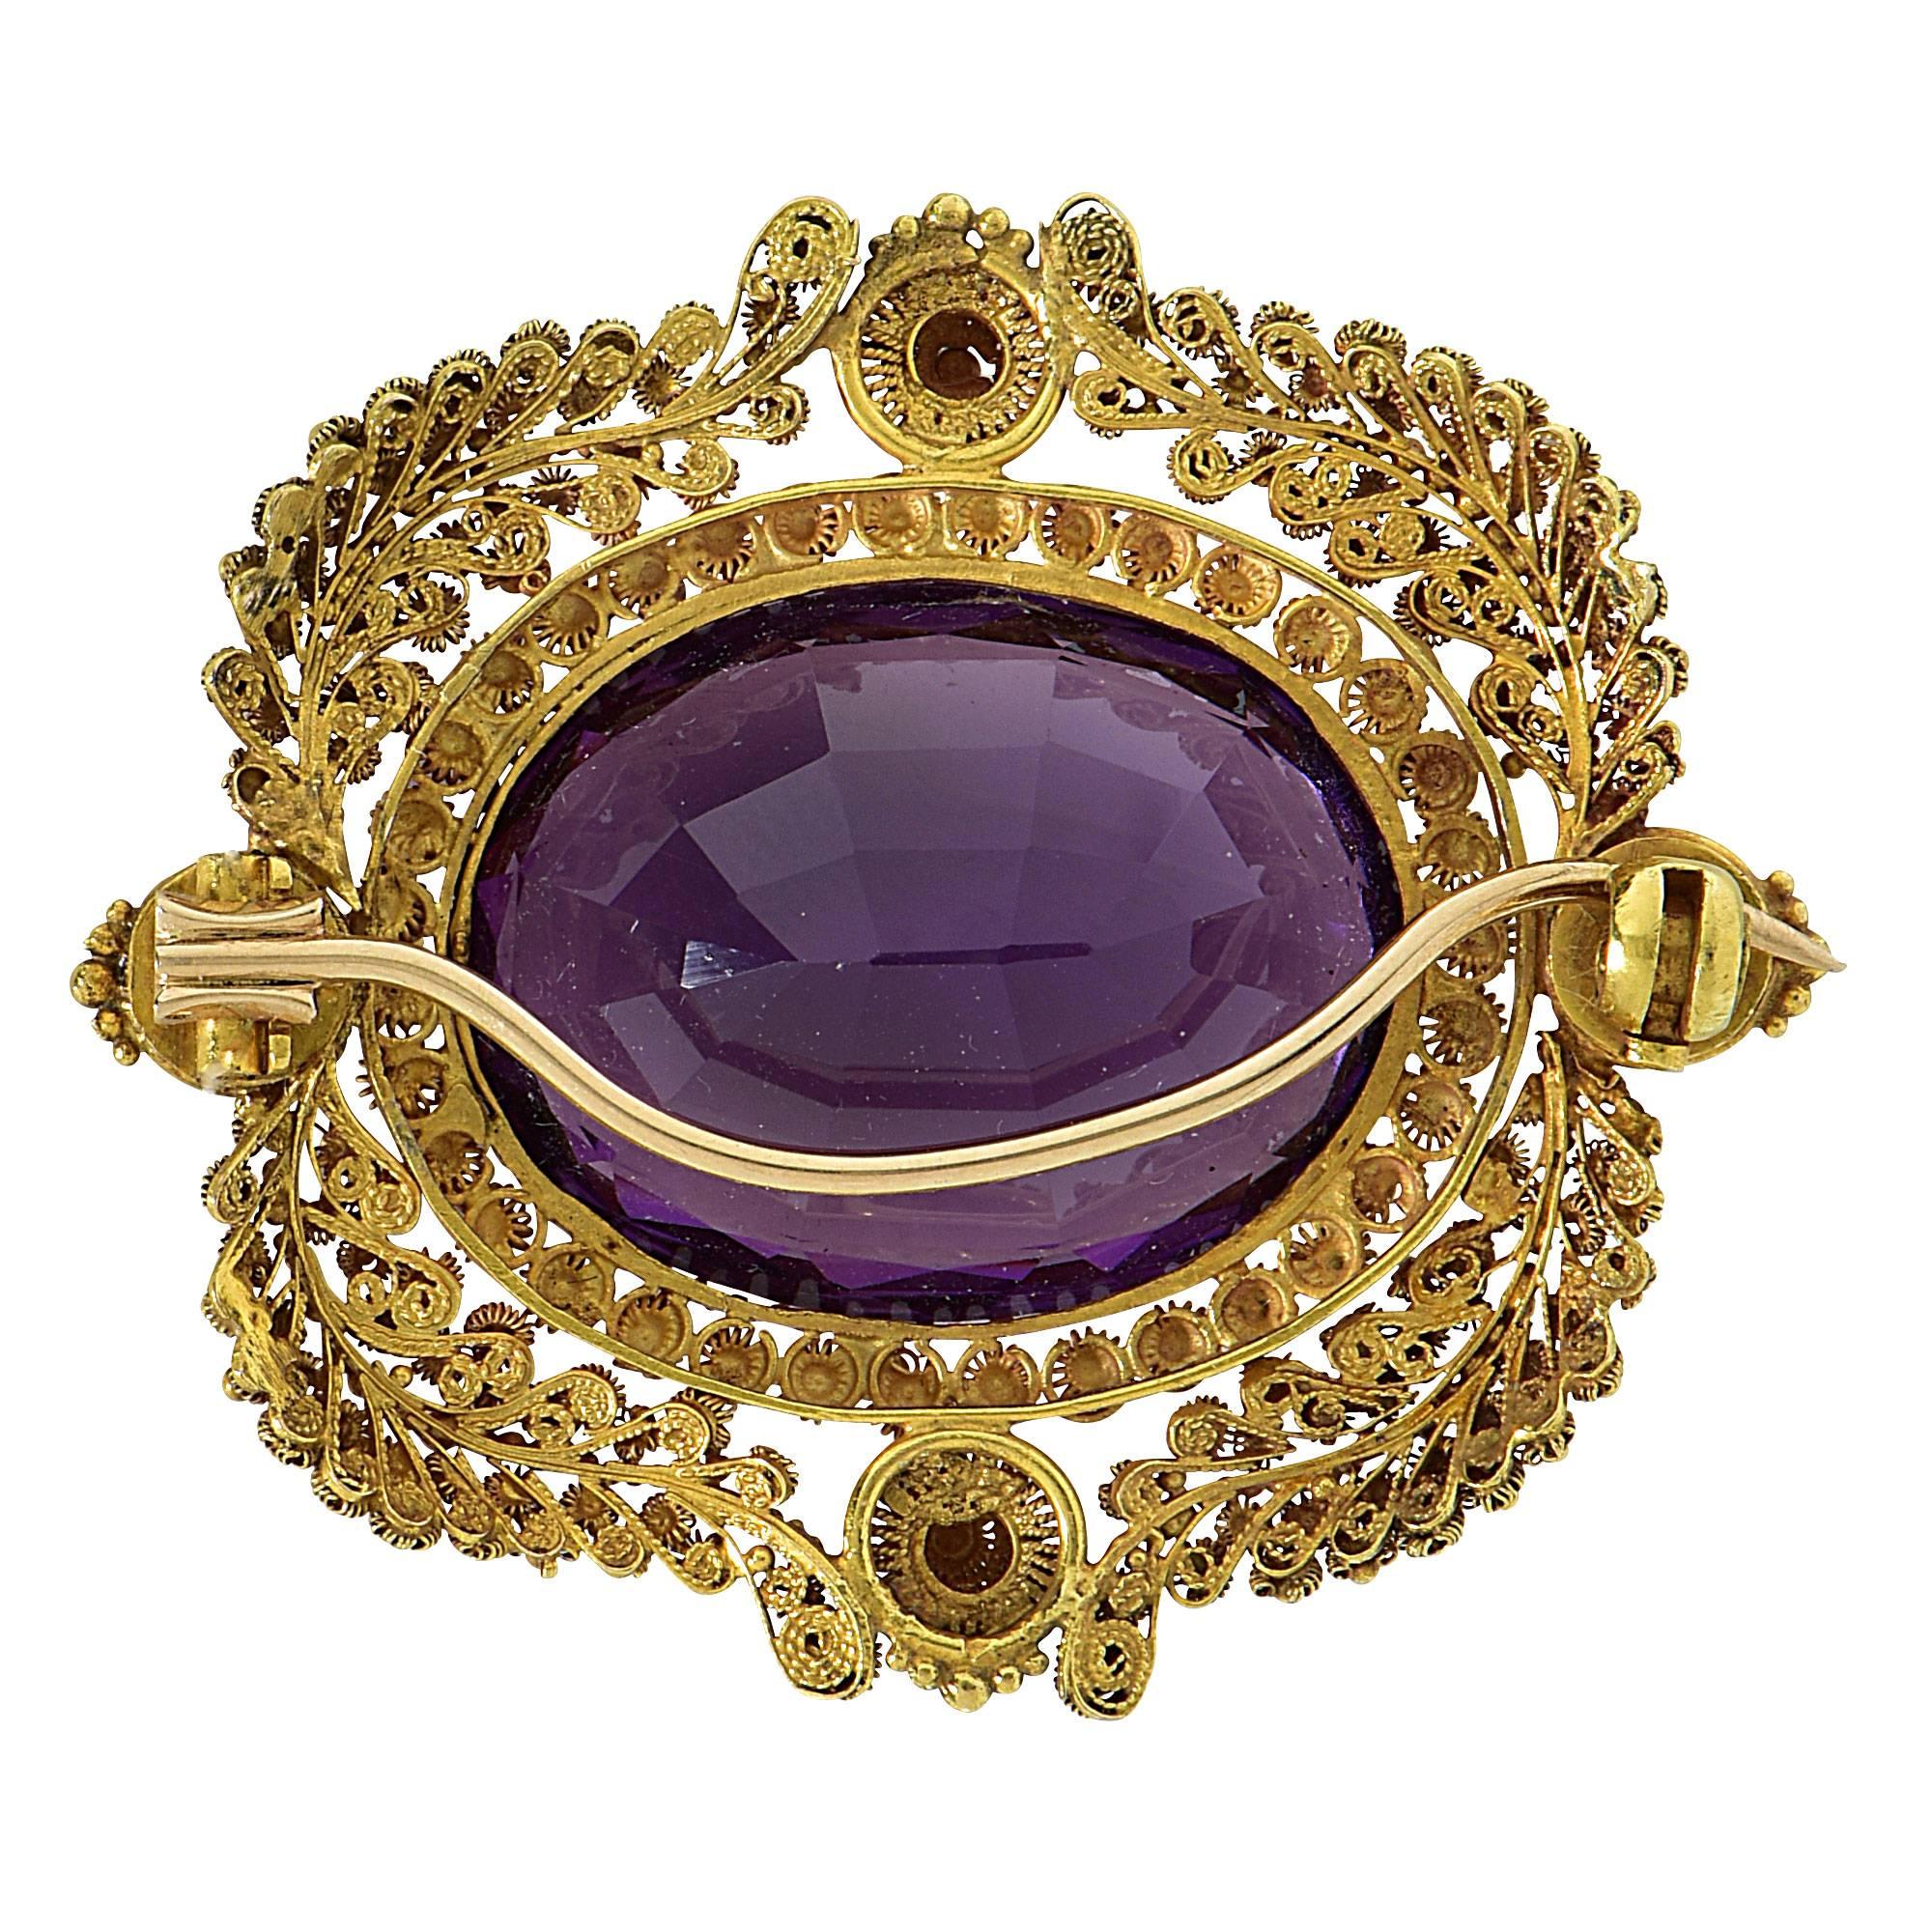 20k yellow gold brooch featuring a oval cut amethyst weighing approximately 24cts.

Metal weight: 12.44 grams

This amethyst brooch is accompanied by a retail appraisal performed by a GIA Graduate Gemologist.